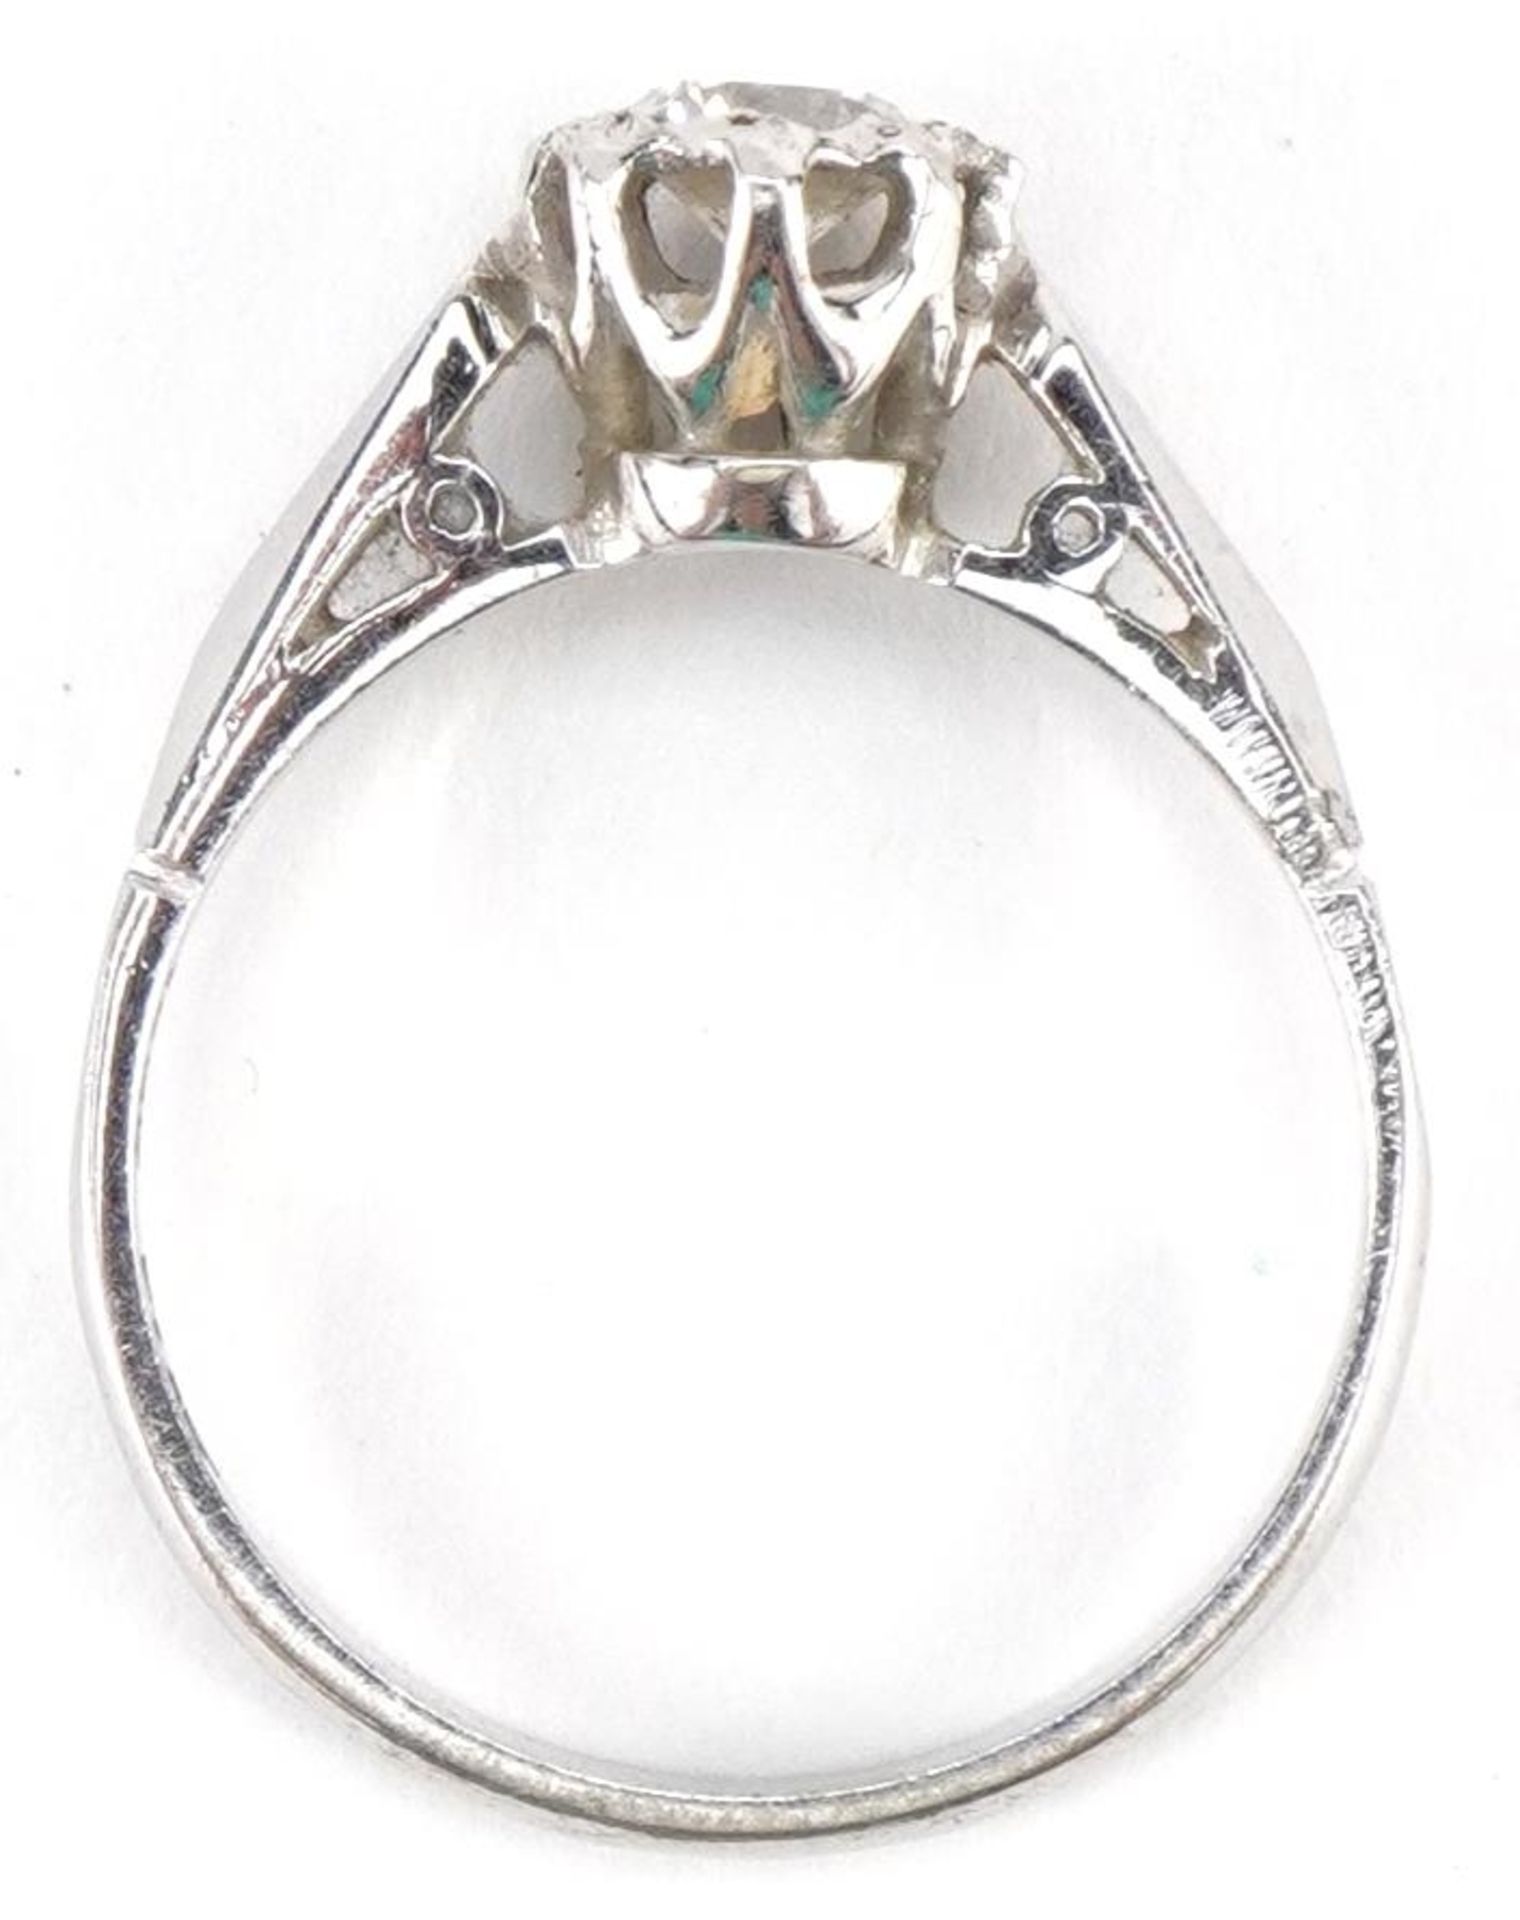 18ct white gold and platinum diamond solitaire ring, the diamond approximately 0.26 carat, size L, - Image 3 of 4